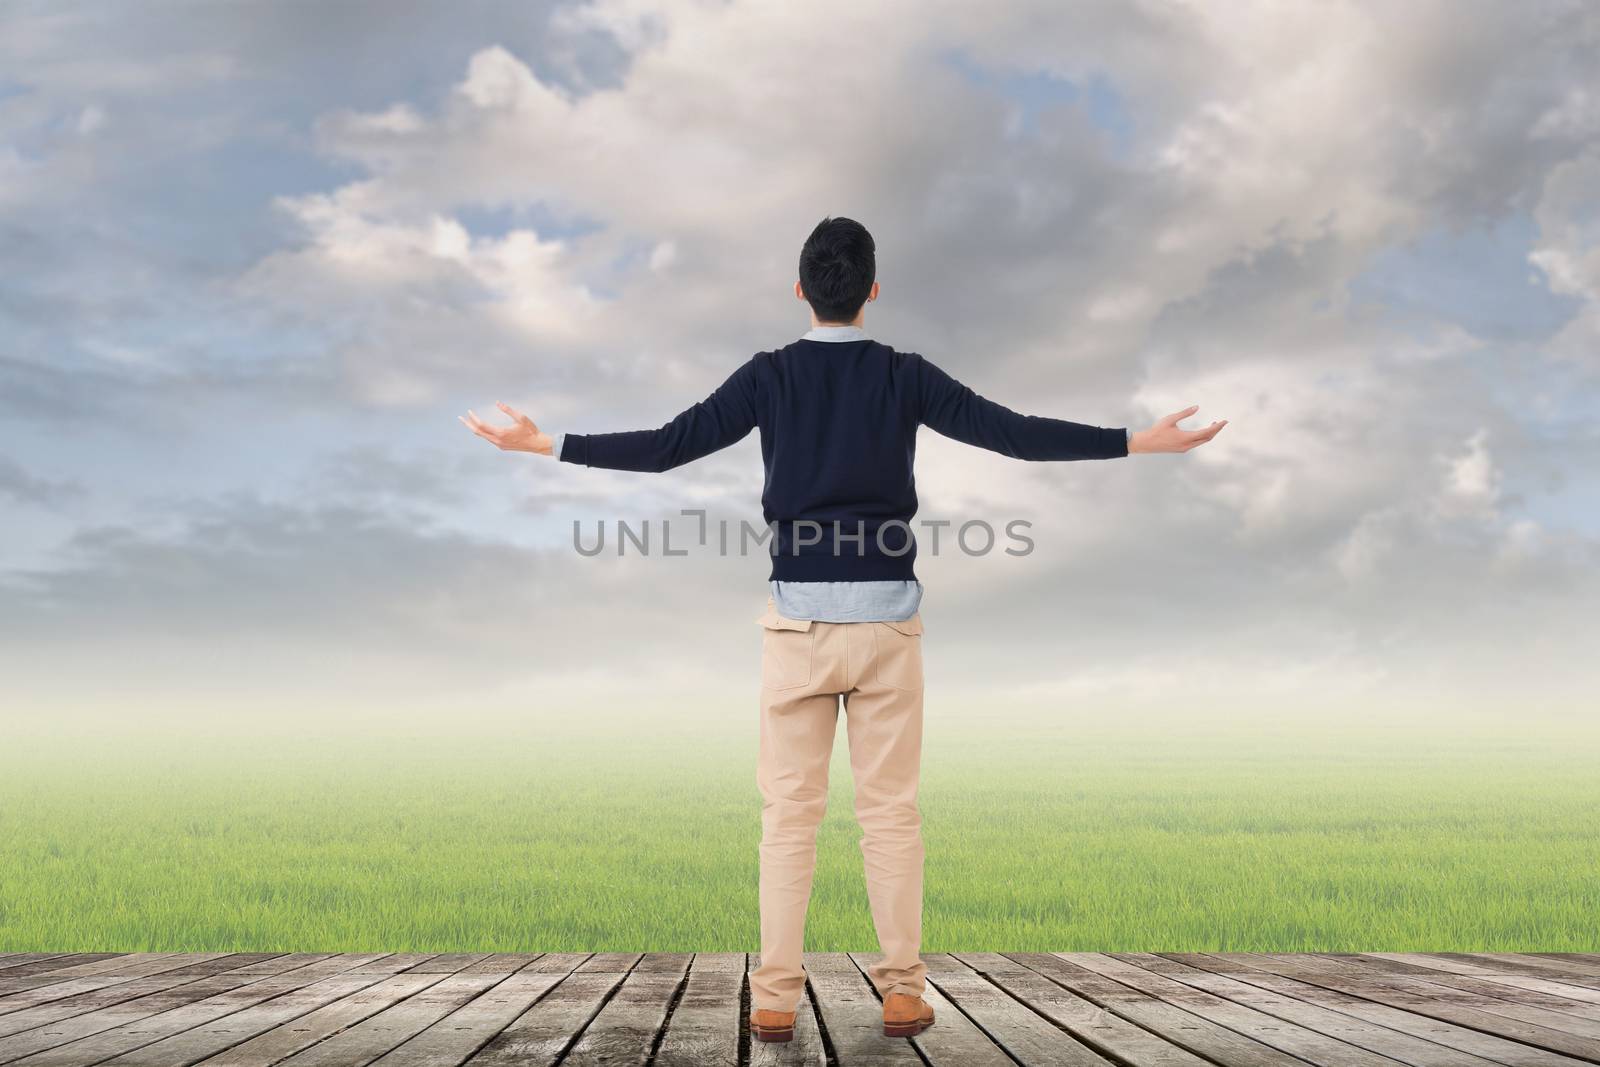 Asian man against grassland with copyspace.